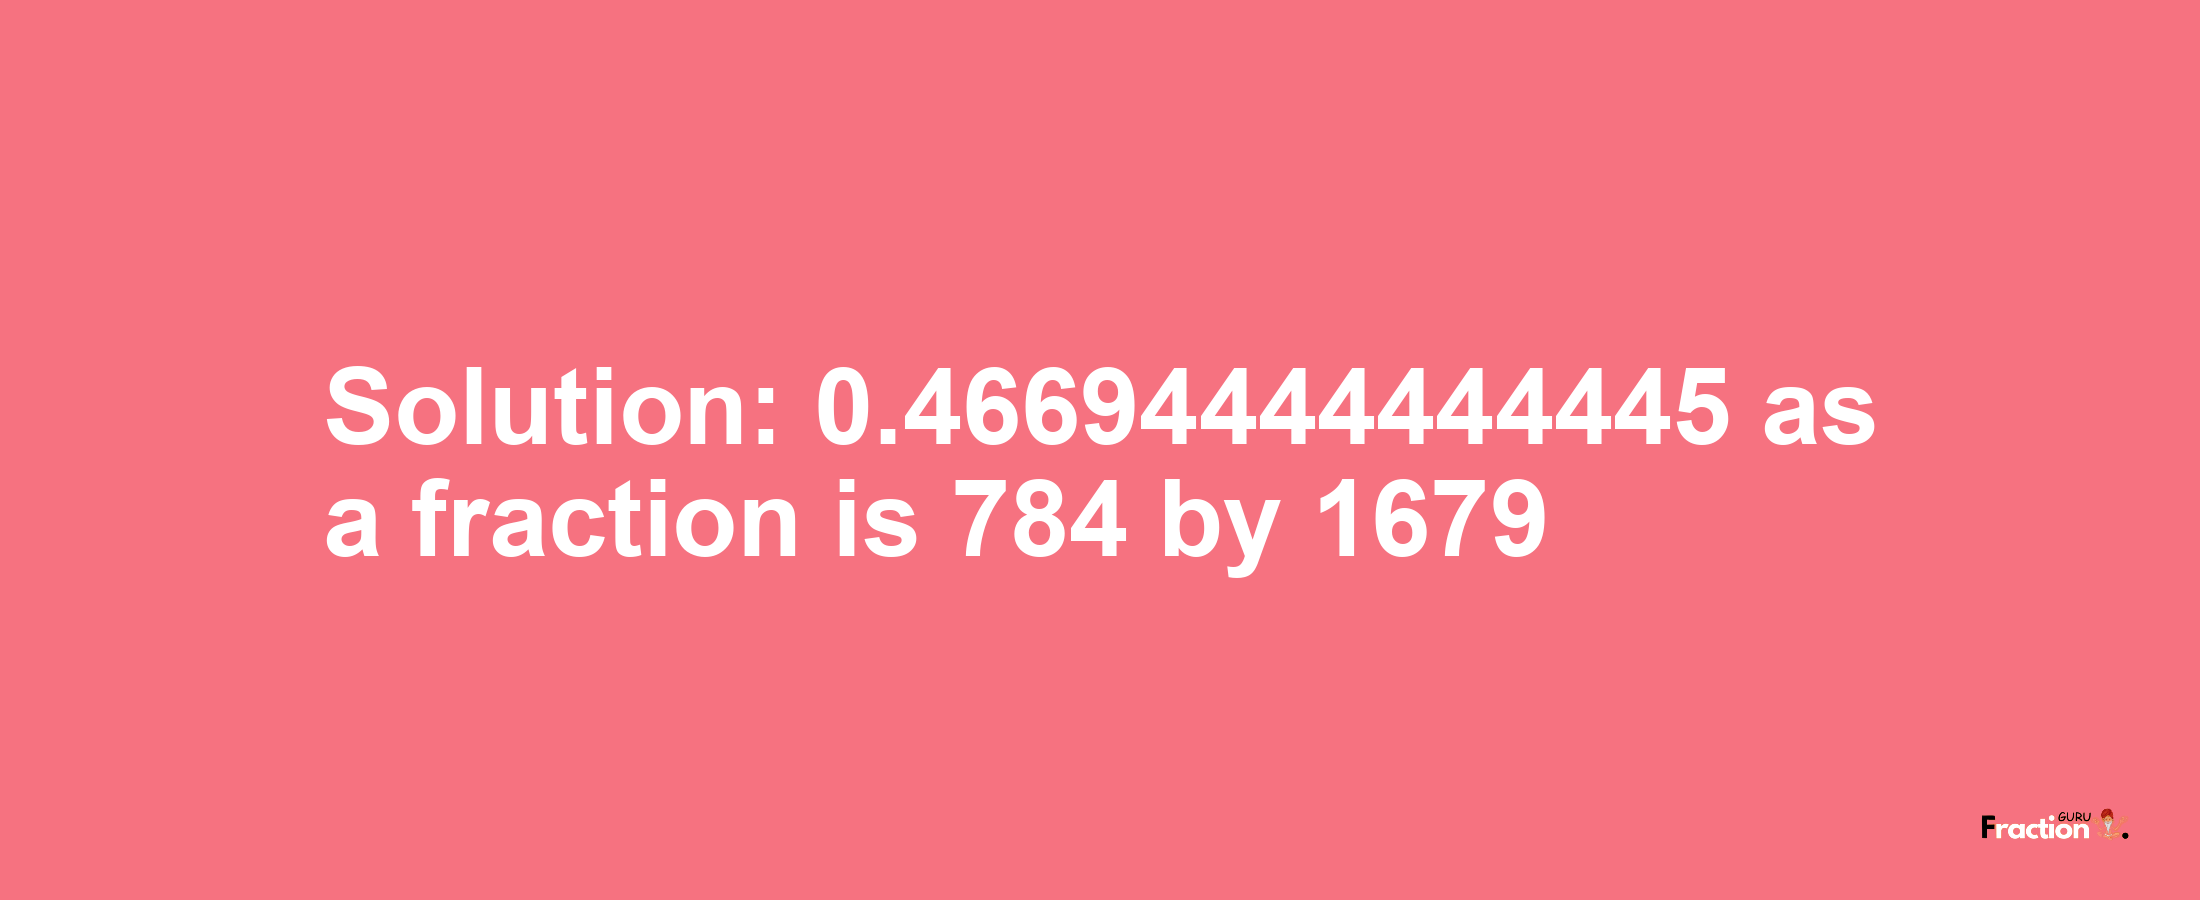 Solution:0.46694444444445 as a fraction is 784/1679